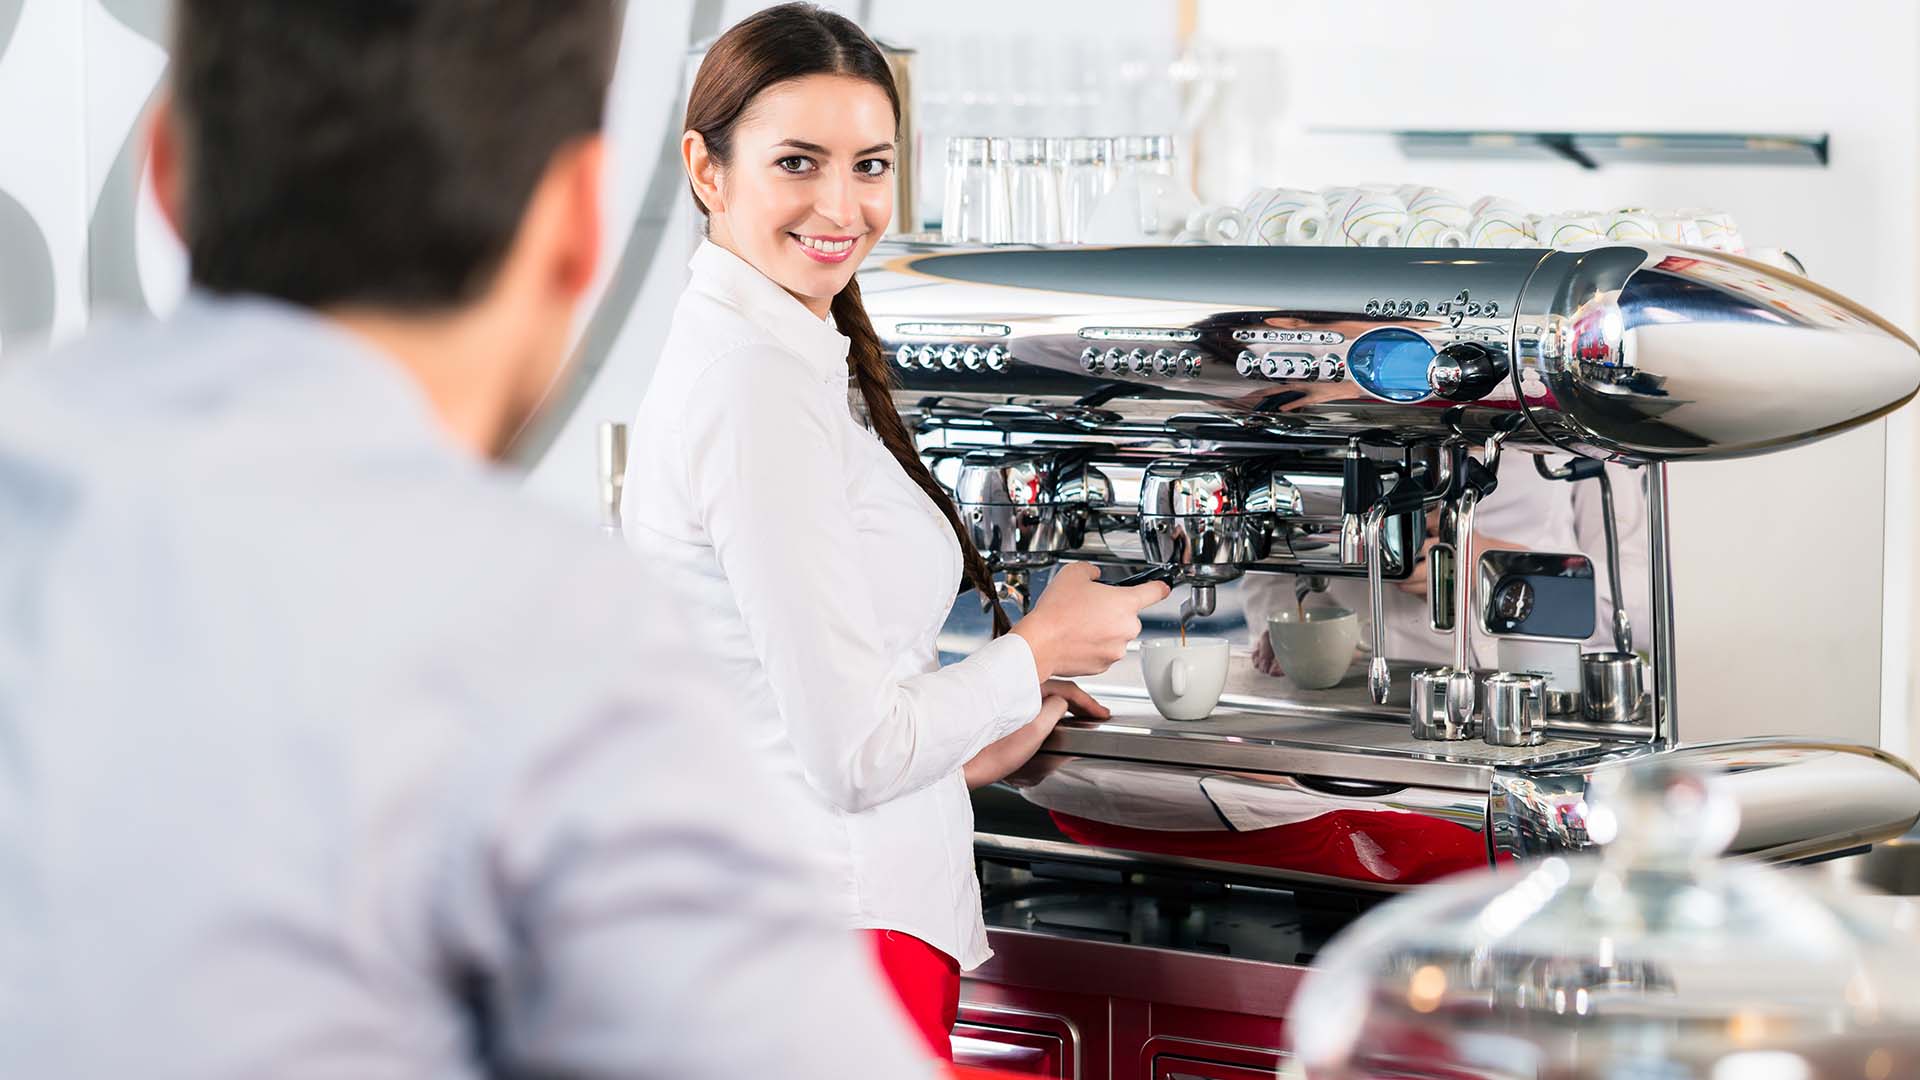 Brunette woman and man conversing and smiling at each other while woman is preparing a coffee in front of a coffee machine.